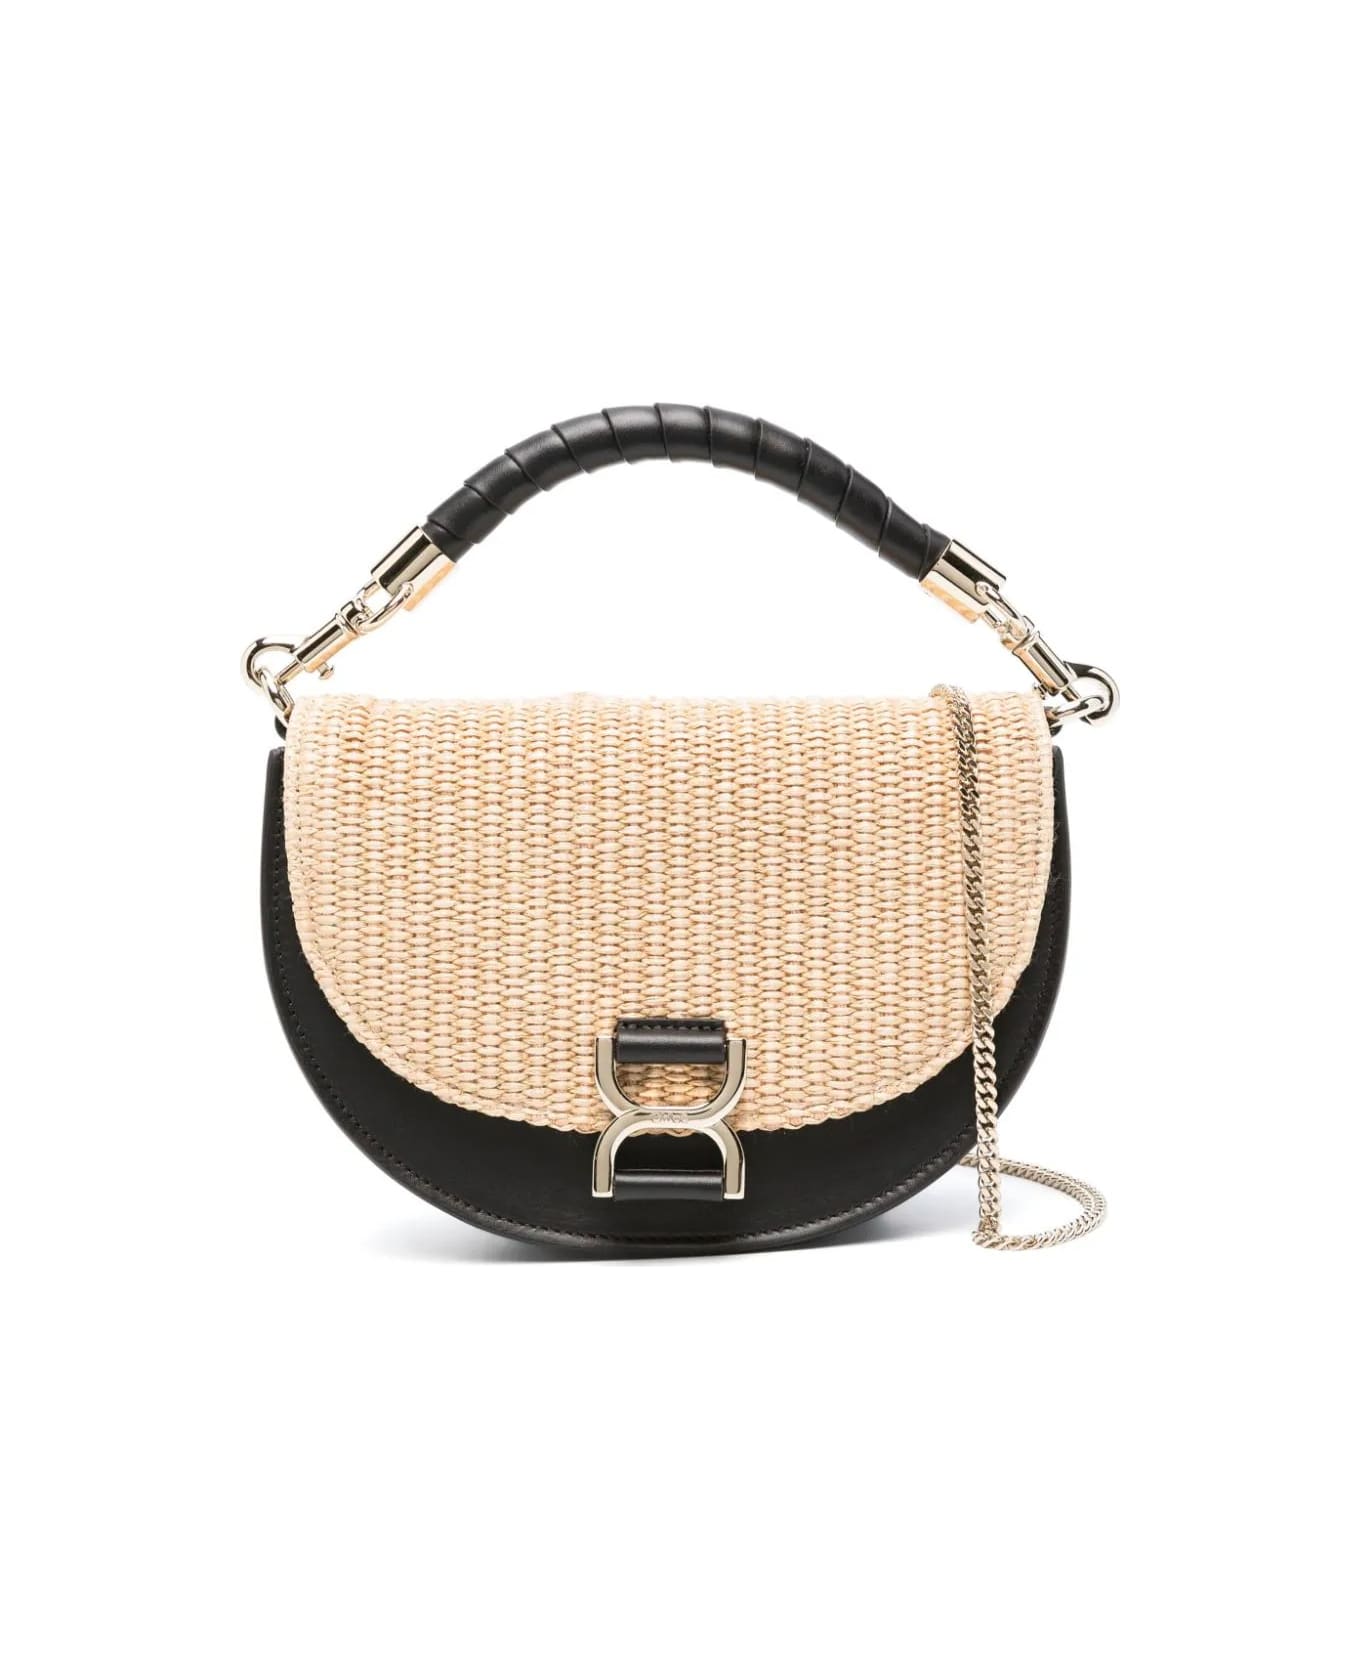 Chloé Marcie Flap And Chain Bag In Hot Sand - Brown